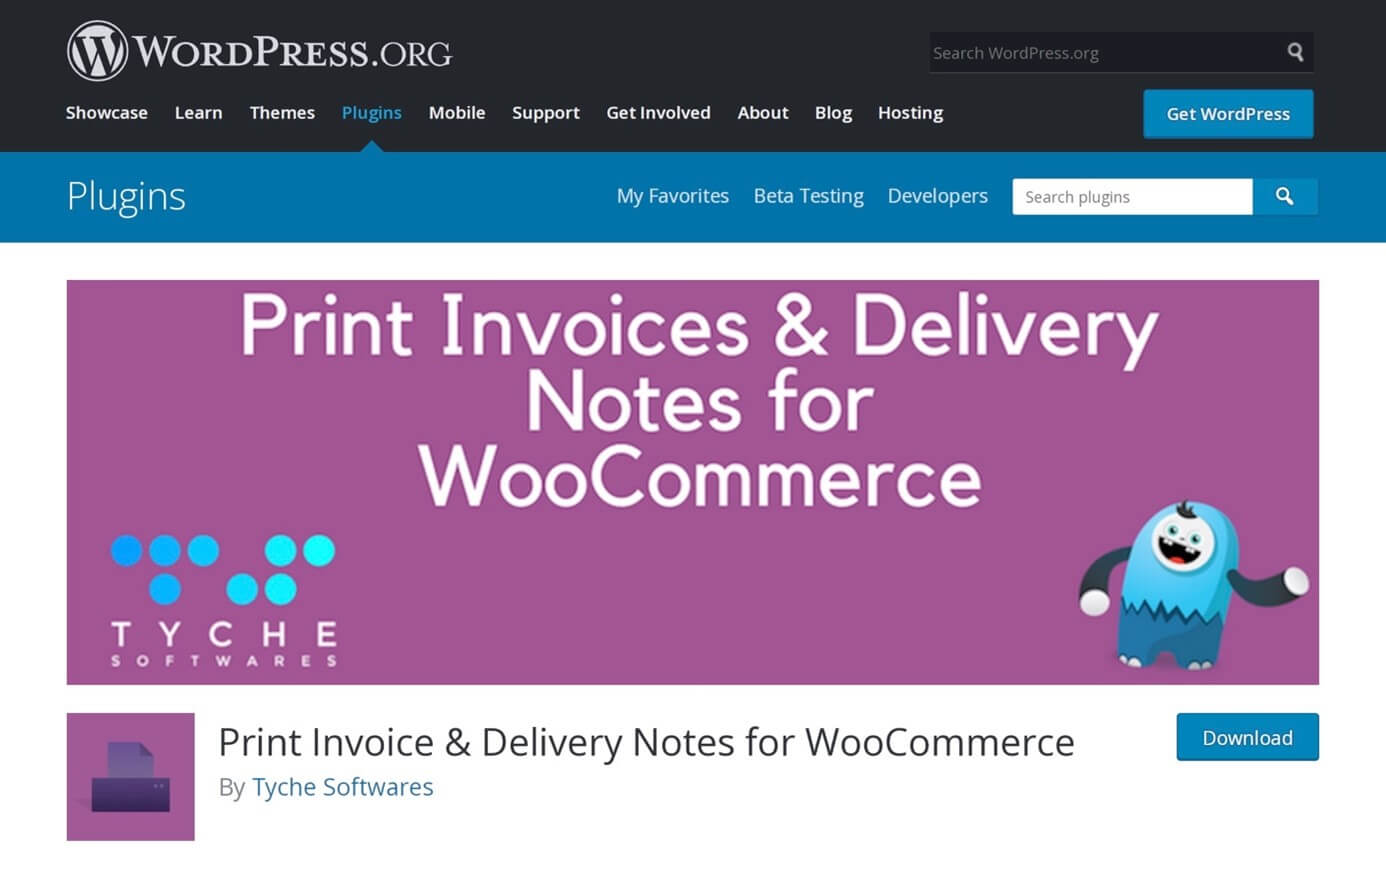 Website of the WooCommerce plugin Print Invoice & Delivery Notes for WooCommerce by Tyche Softwares